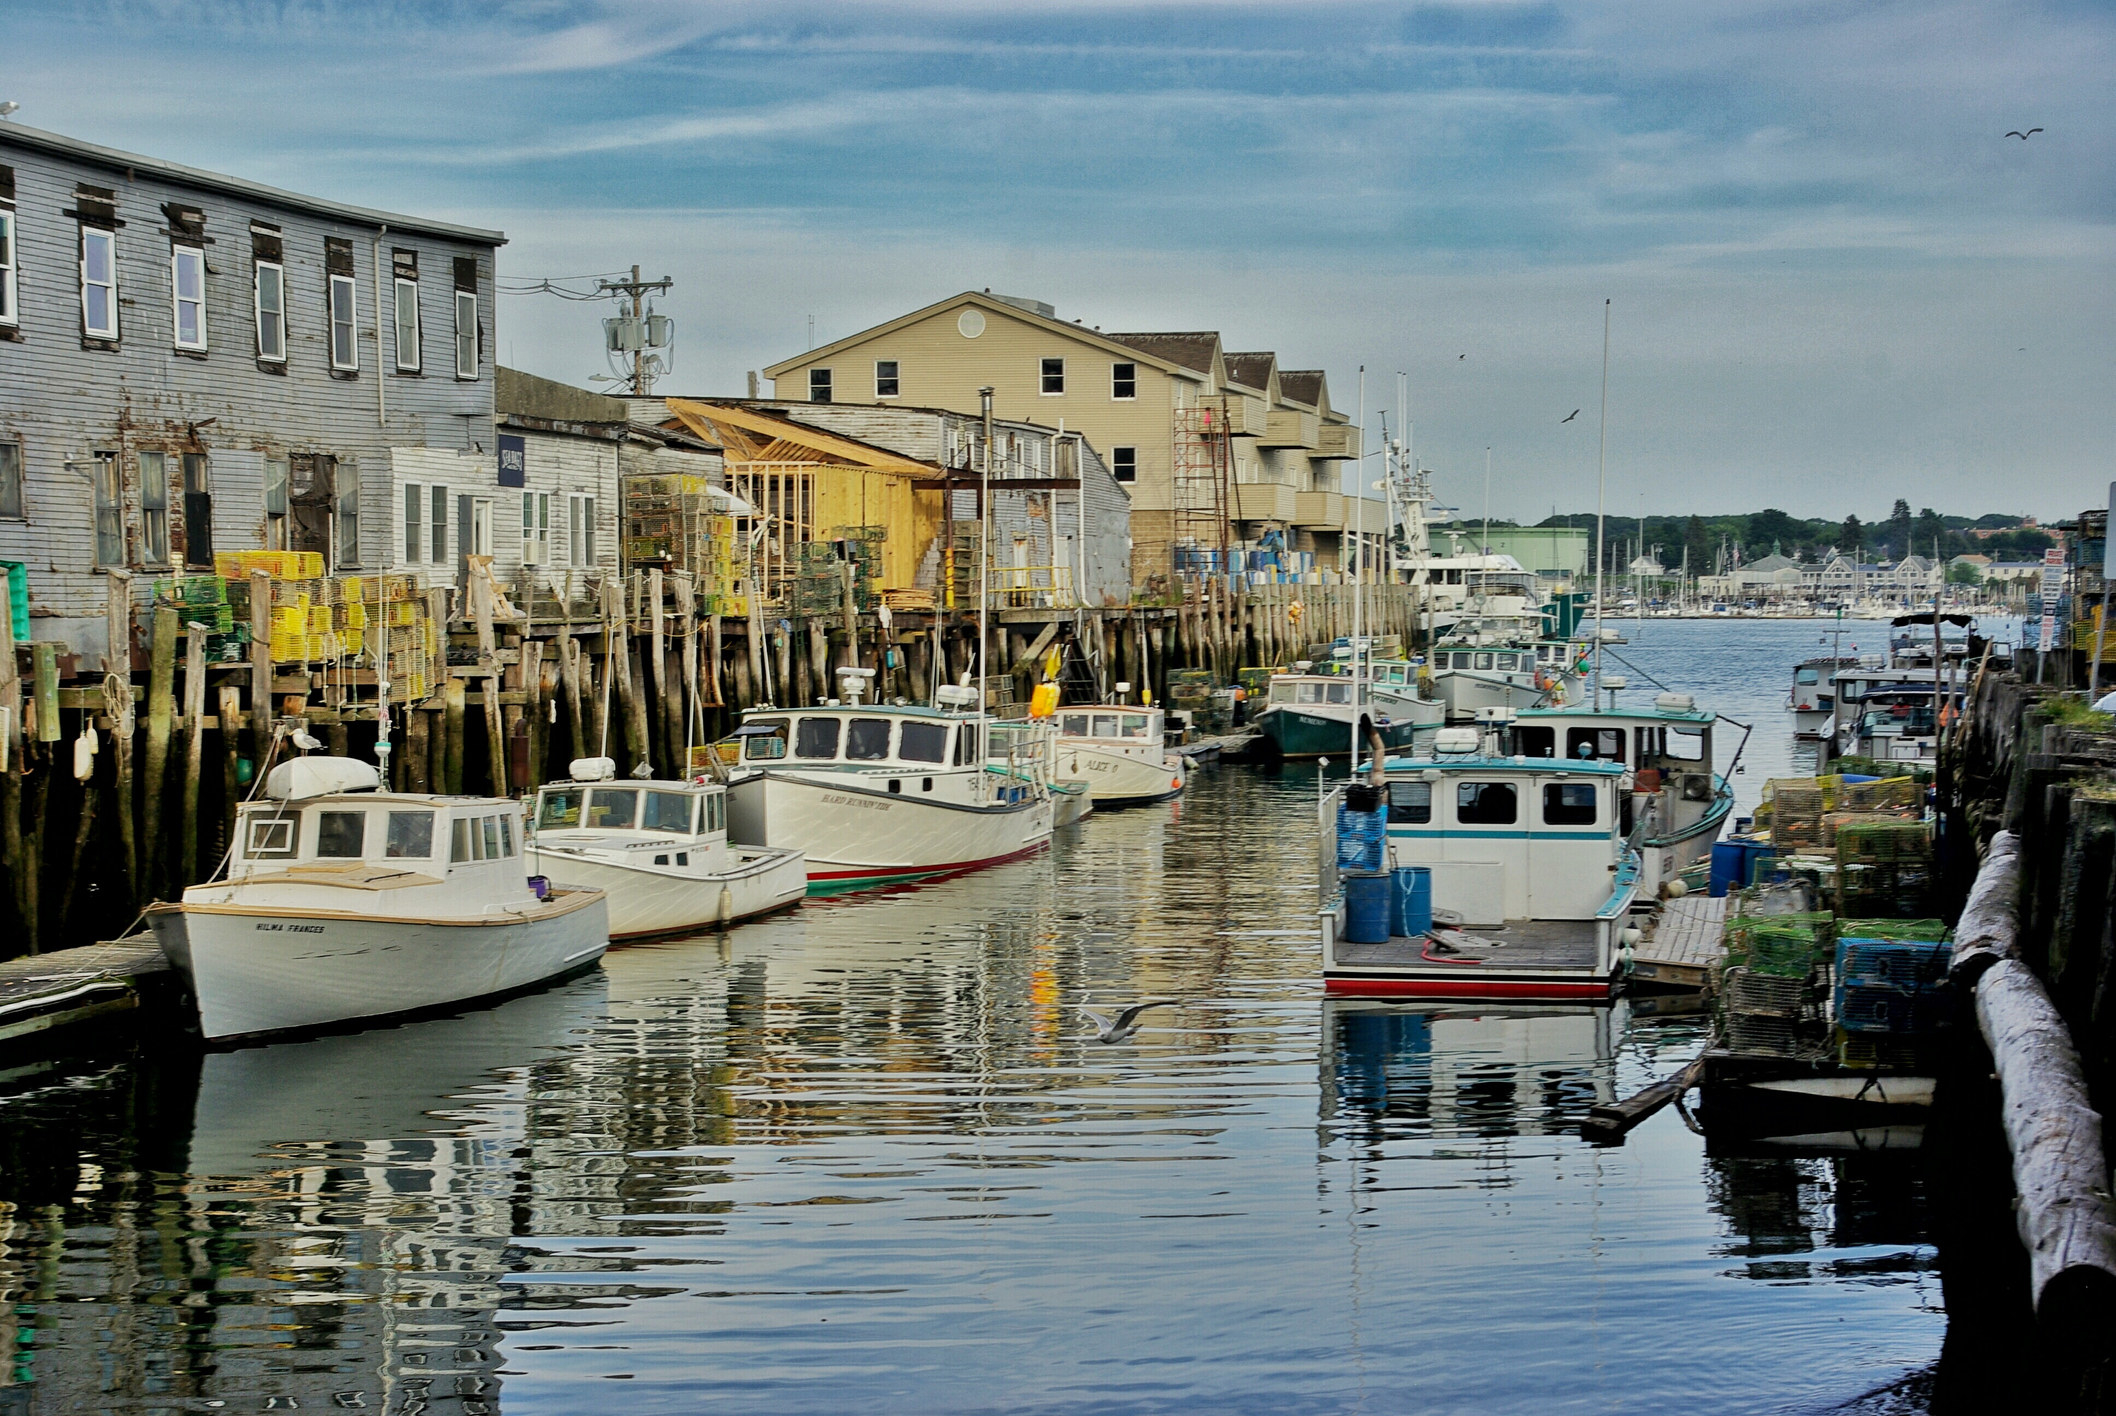 Boats and warehouses in a port in Portland, Maine